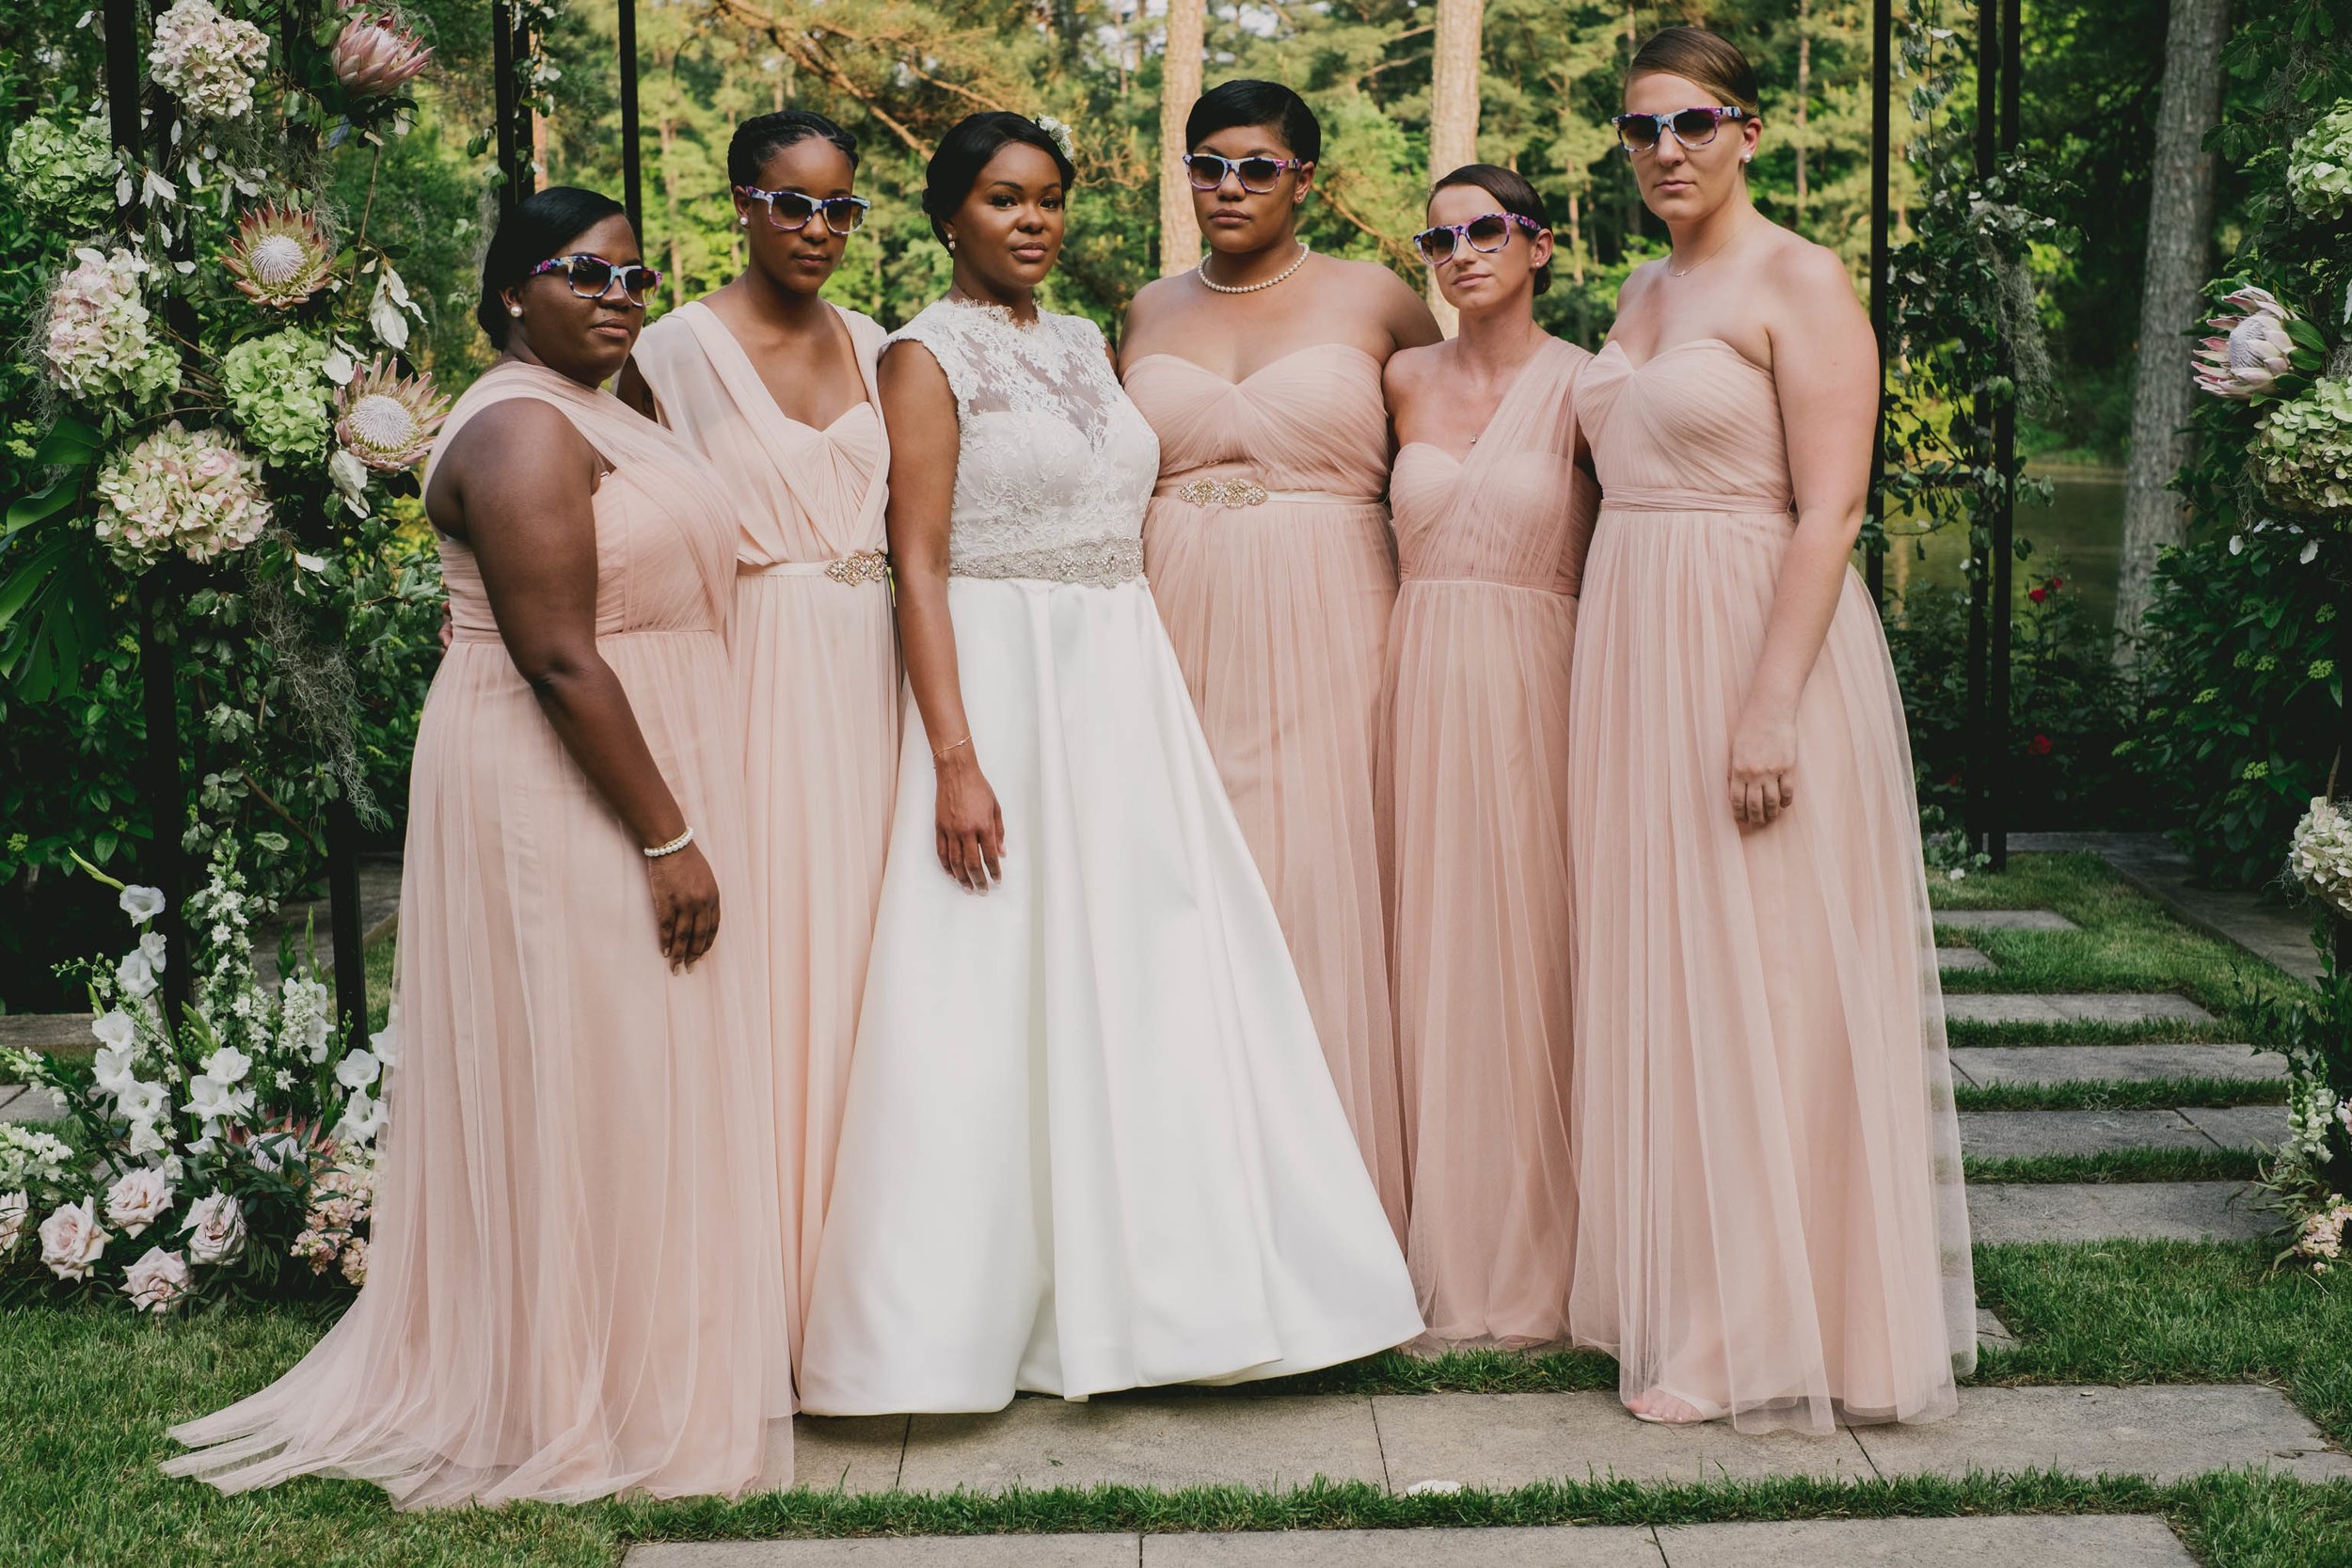 The bride and her bridesmaids looking amazing in their dresses